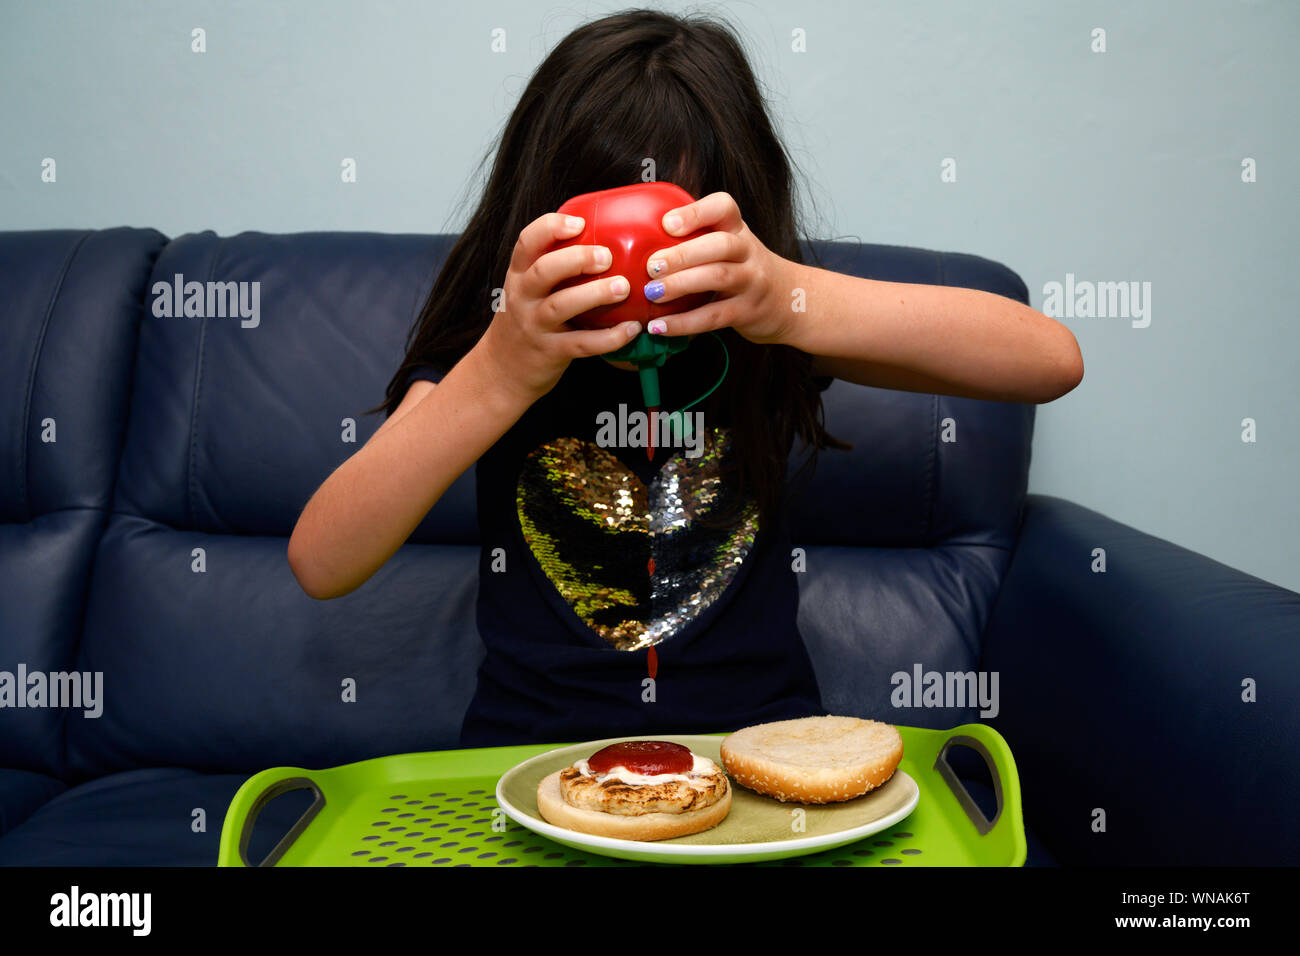 Young girl squirting tomato ketchup on a chicken burger Stock Photo